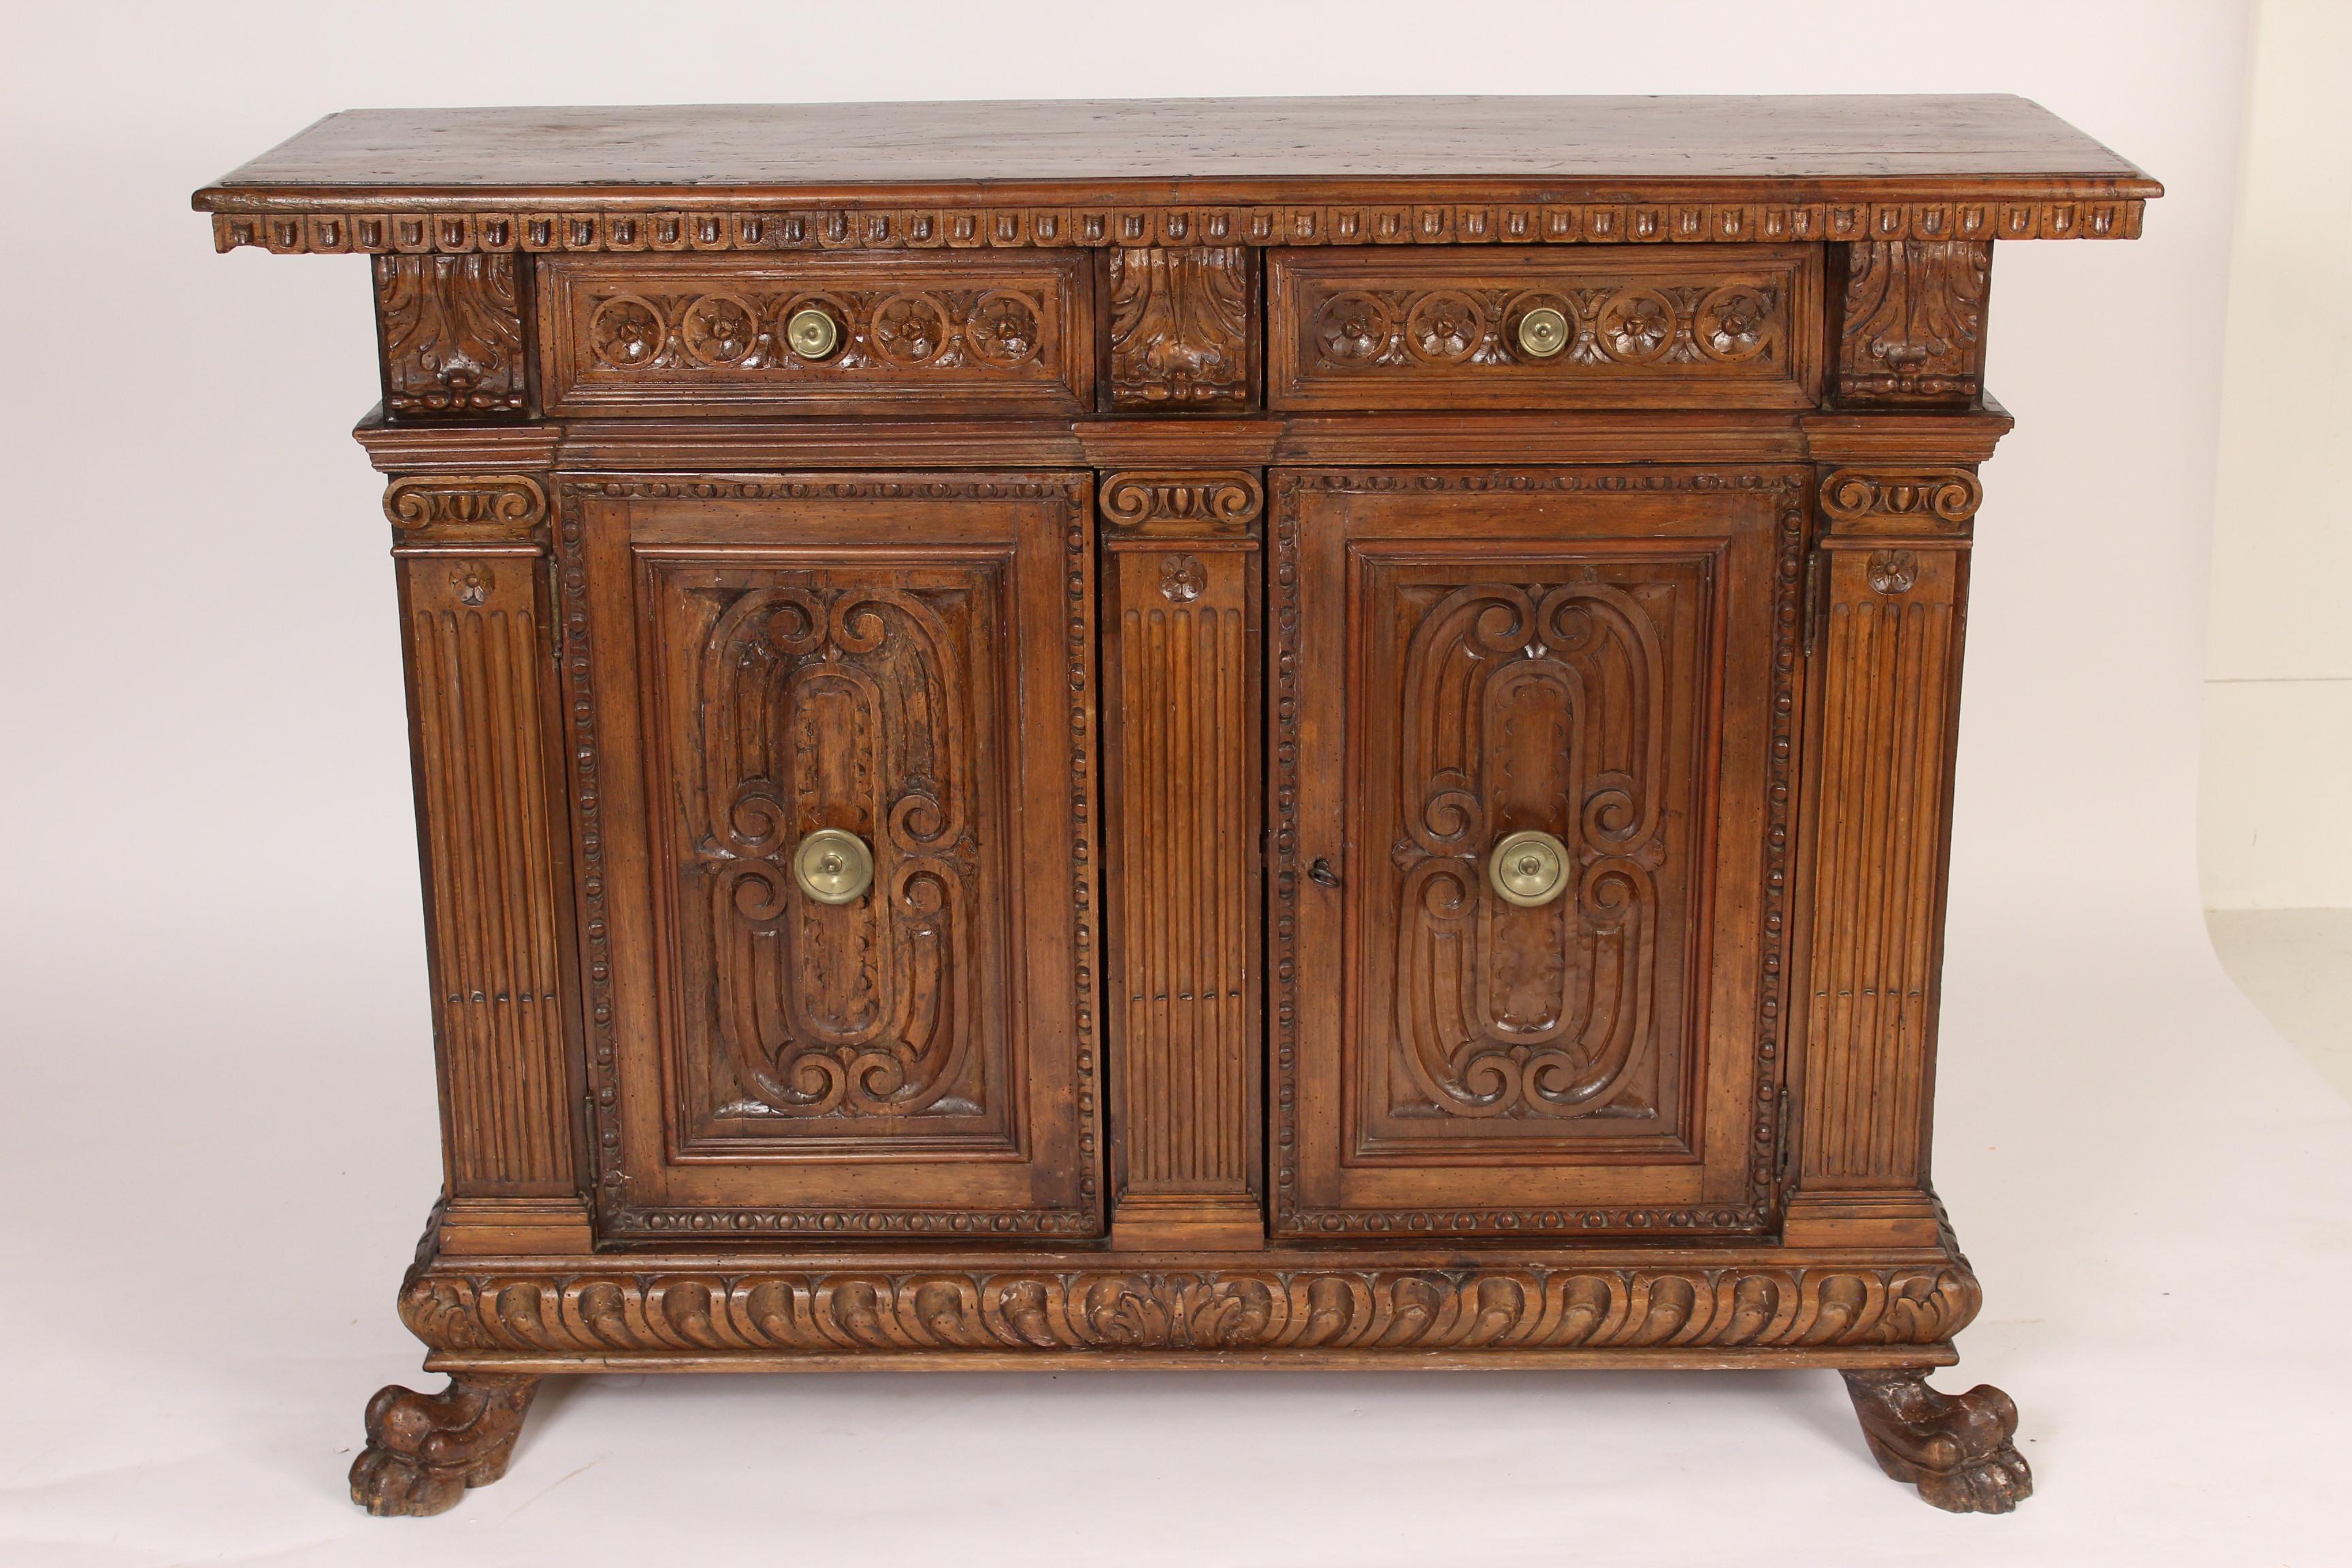 Italian Baroque style beech wood and walnut credenza, made from antique and later elements. Assembled, circa 1950s. With acanthus leaf carvings, dental moldings, rosette carvings, ionic capitals atop fluted columns and well defined paw feet. Inside